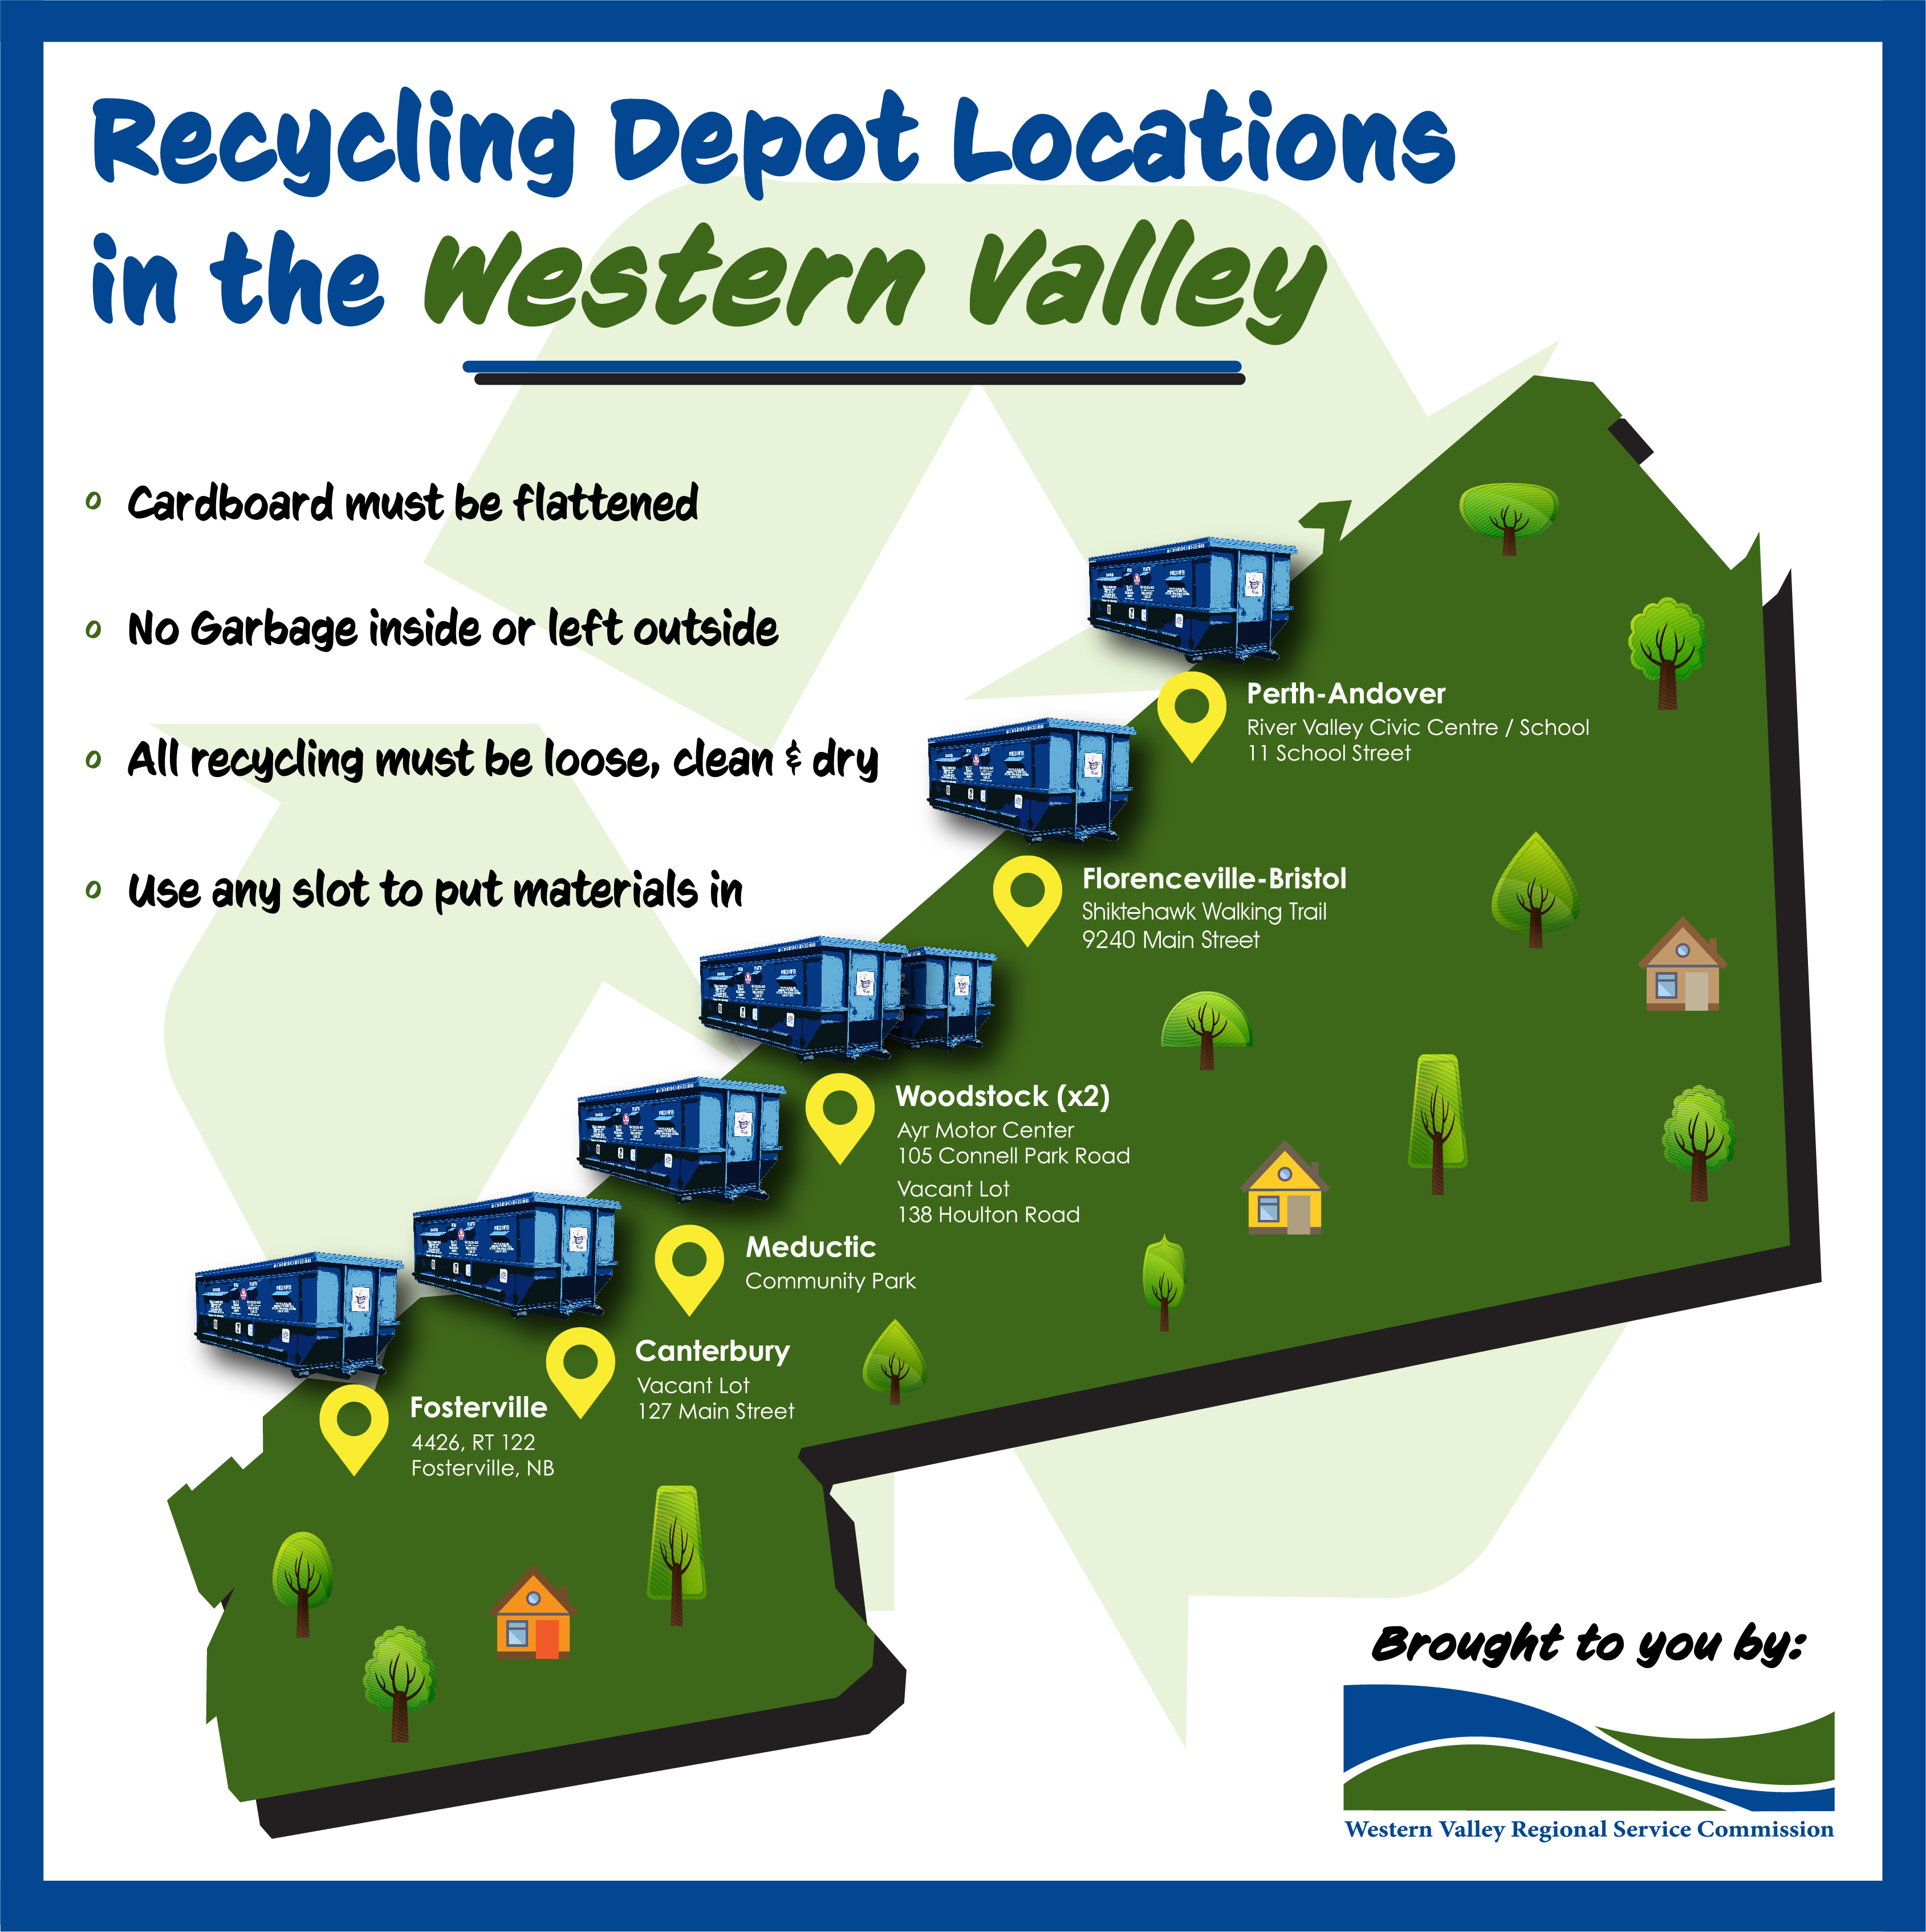 https://www.rsc12.ca/wp-content/uploads/2022/11/Recycling-Depot-Locations-in-the-Western-Valley.jpg